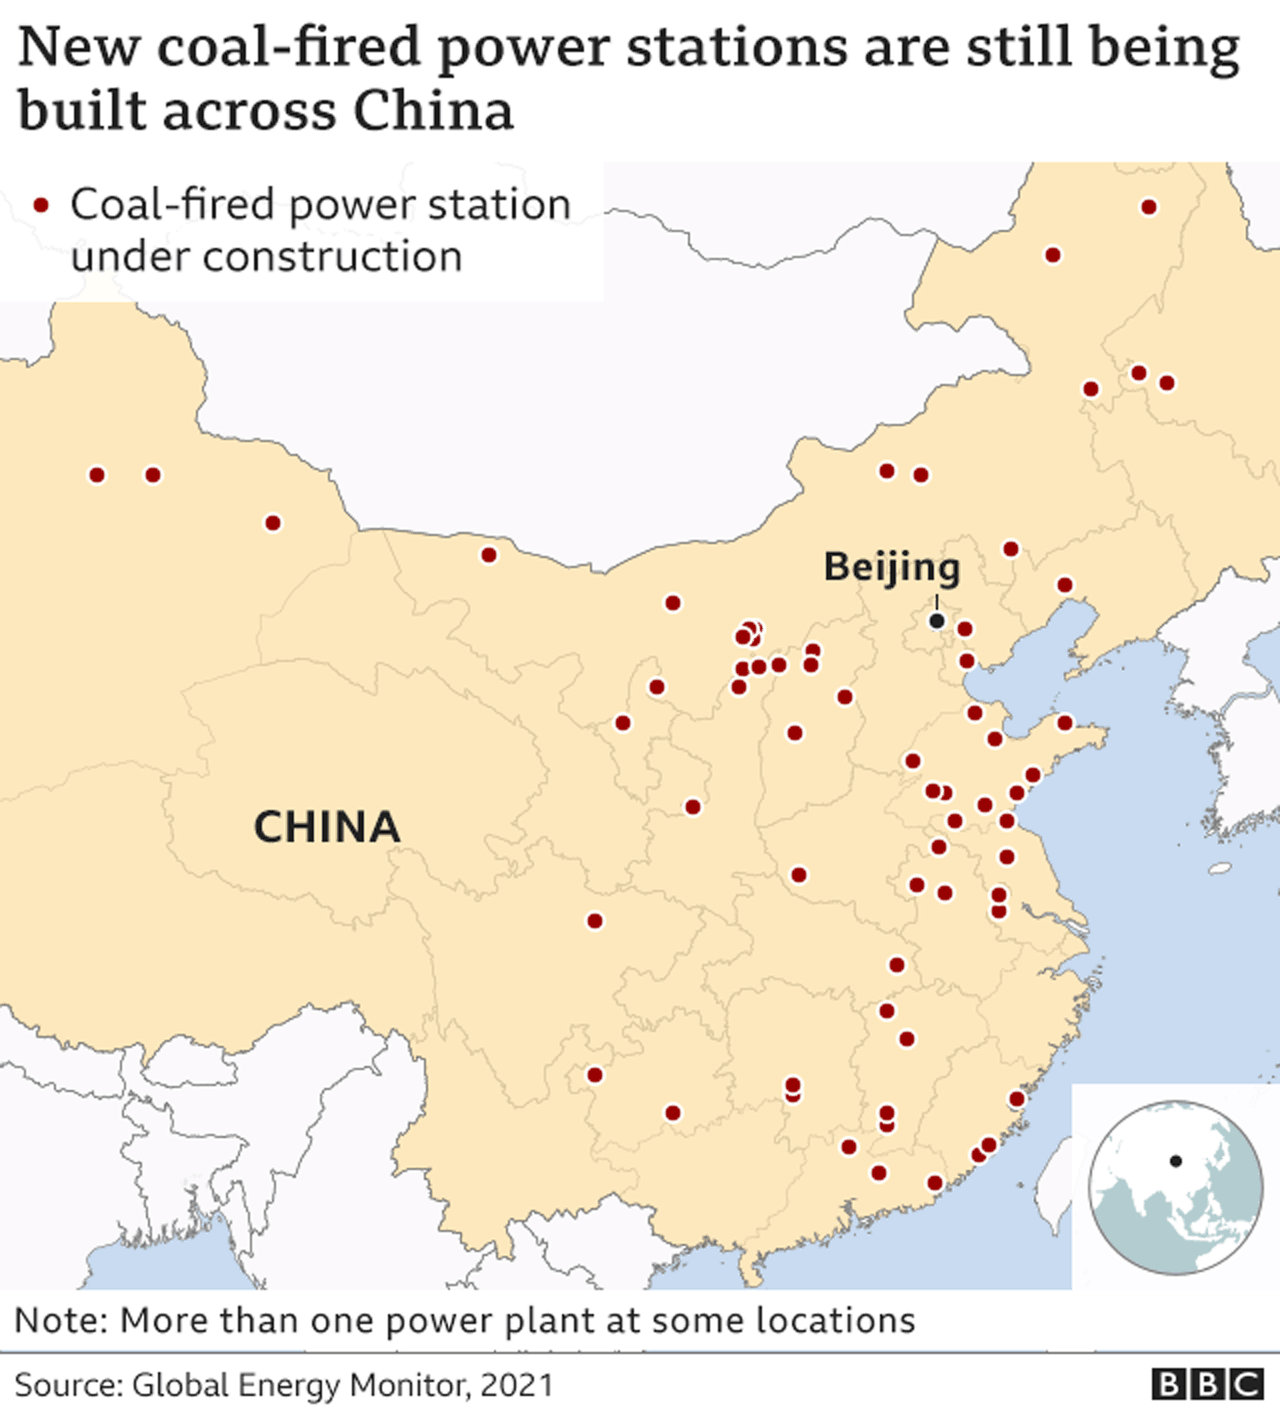 Map showing new coal-fired power plants under construction across China